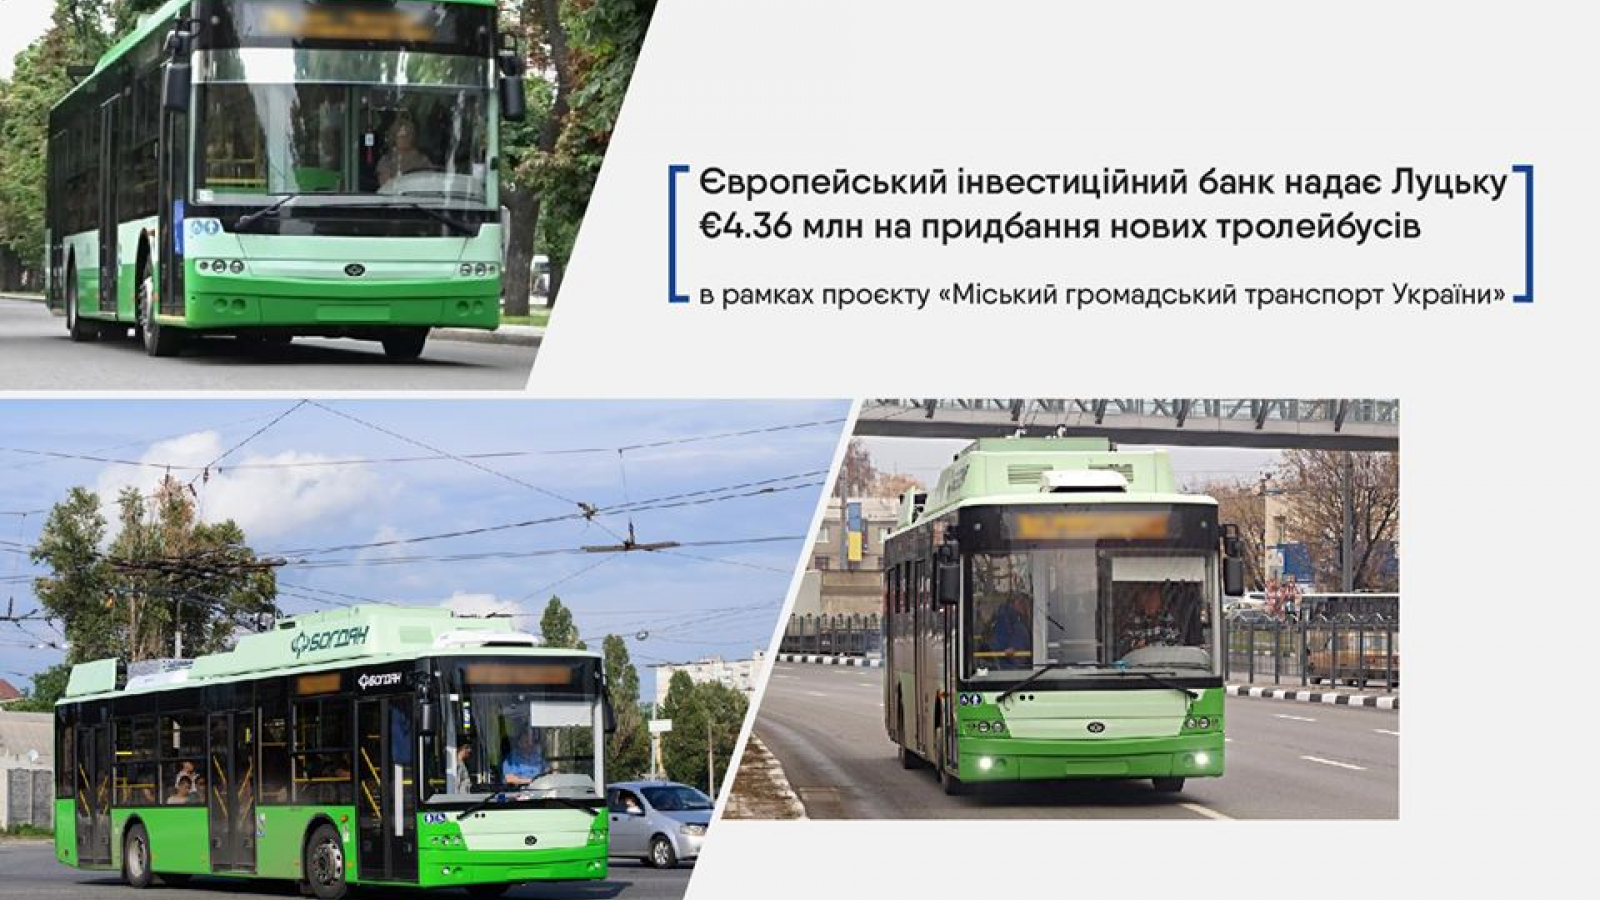 Ukraine: Lutsk receives 29 new energy-efficient trolley-buses thanks to EU support